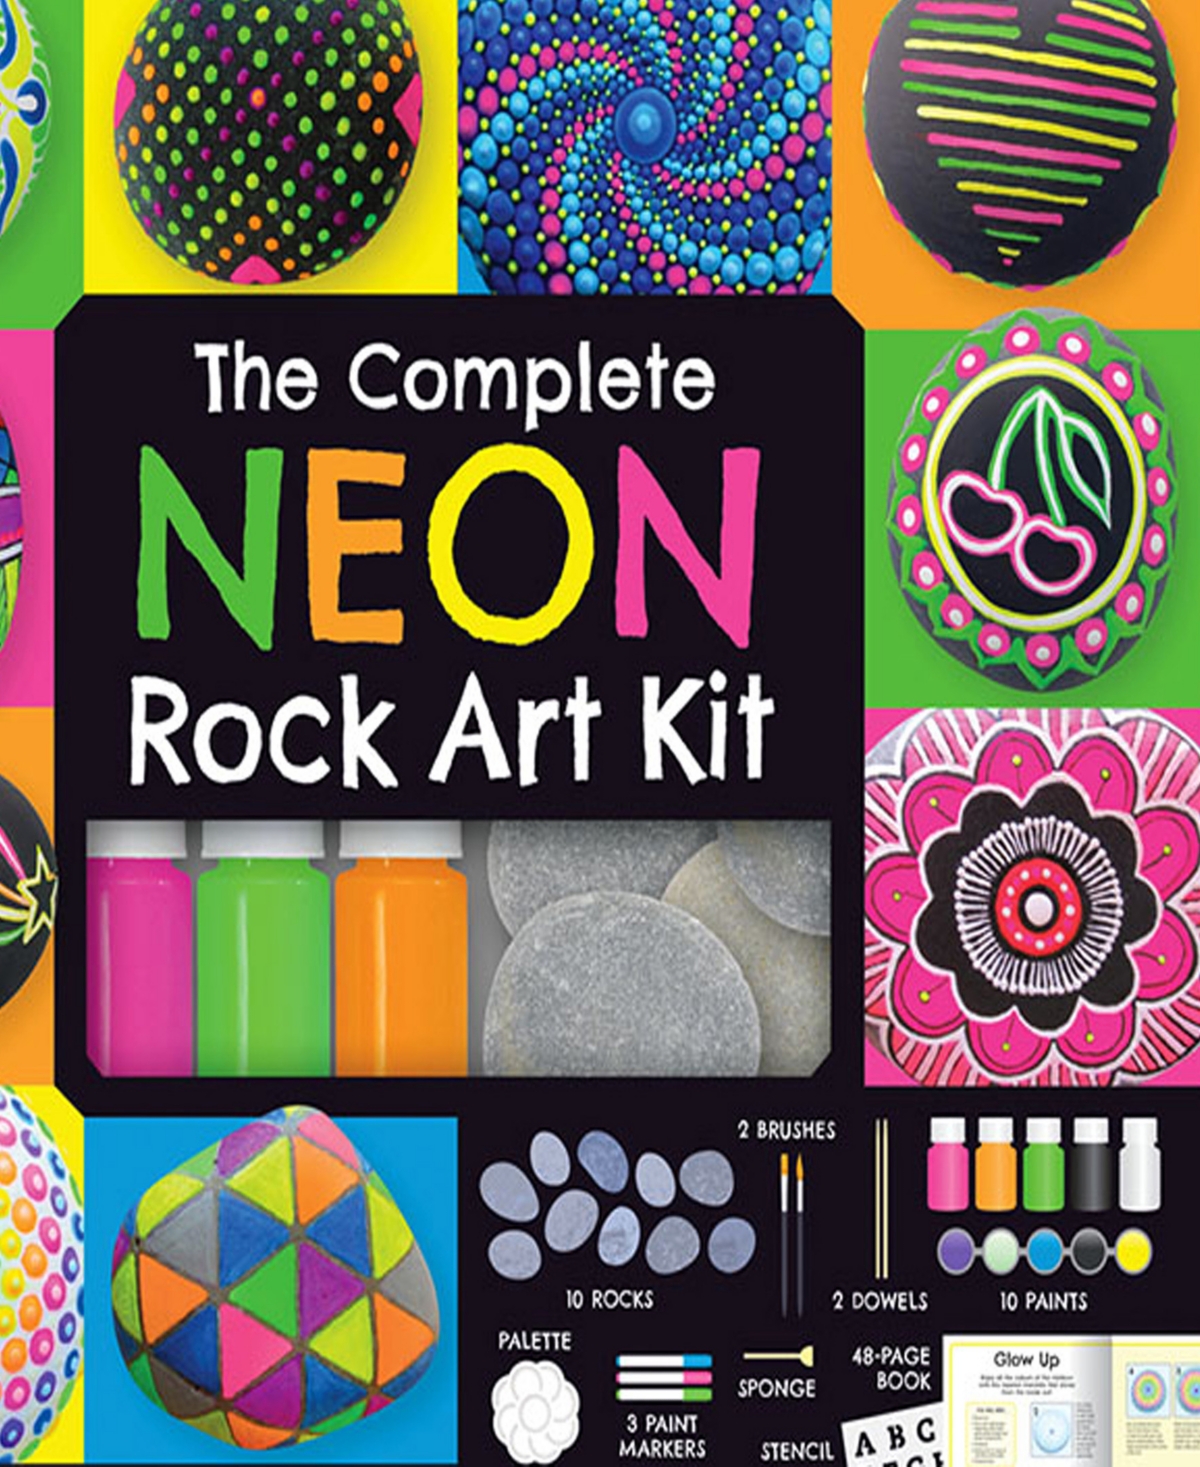 Shop Craft Maker The Complete Neon Rock Art Kit Diy Rock Painting For Kids, Rocks, Brushes, Paint, Stencils Included  In Multi